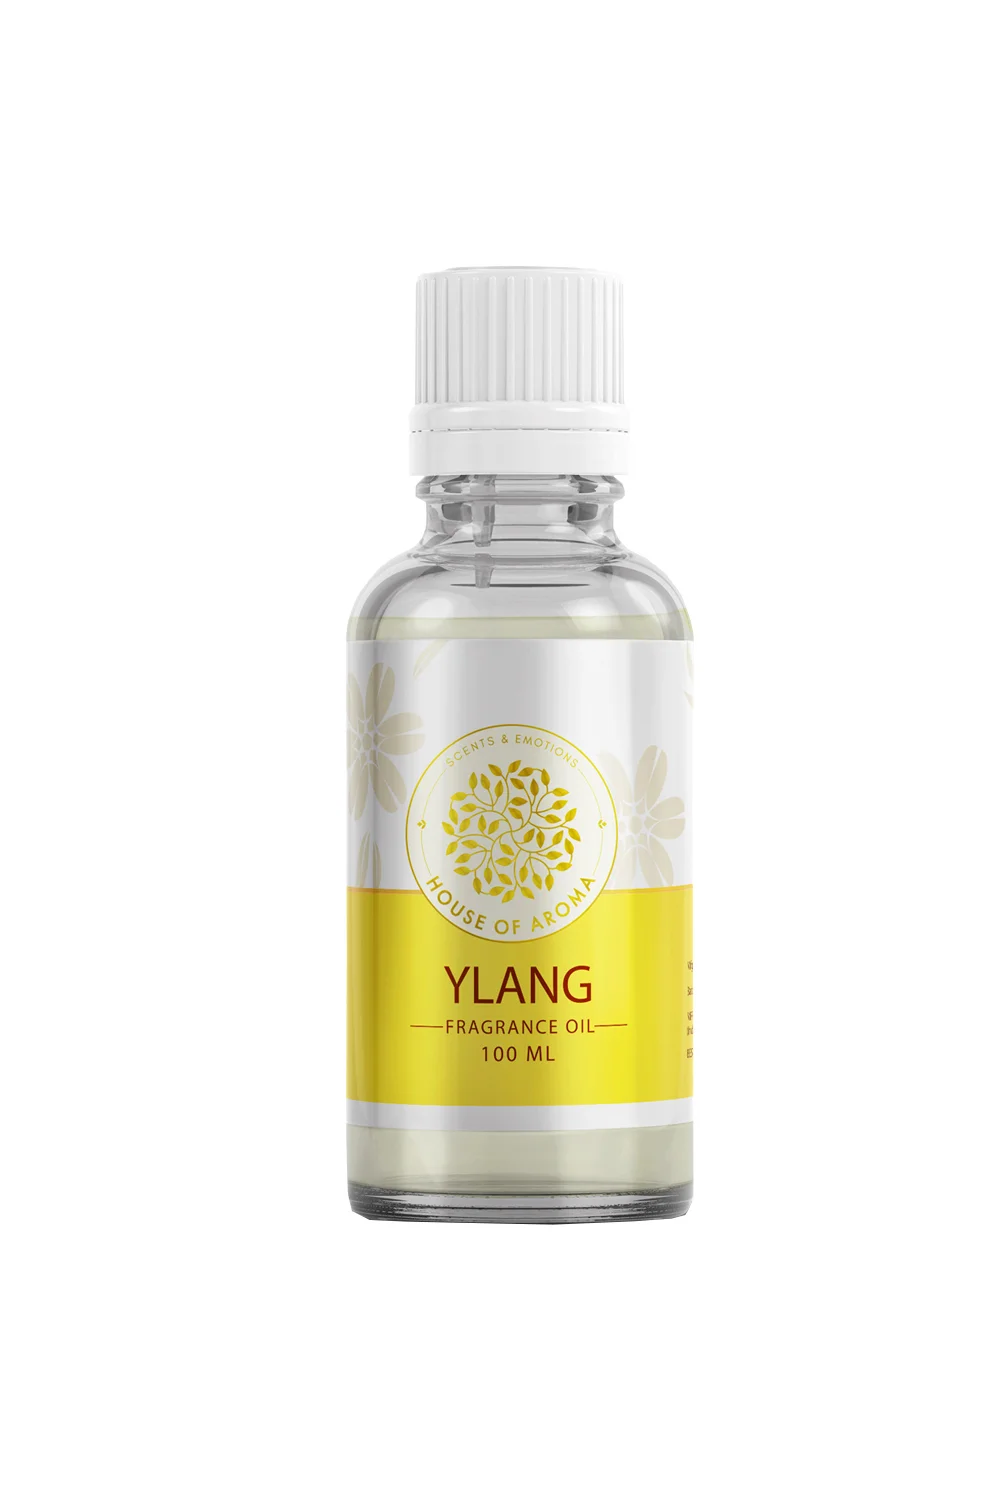 ylang fragrance oil 100ml, Fragrance Oil, Aroma oil, Synthetic oils, Fragrance oil for candles, oil for diffusers, Aromatic oil, Candle oil, Aromatherapy oil, oil manufacturers, House of Aroma, ylang fragrance oil, ylang good scents, ylang ylang fragrance oil for candles, ylang ylang fragrance oil benefits, ylang ylang flower oil fragrance, ylang oil, ylang oil benefits, ylang floral oil